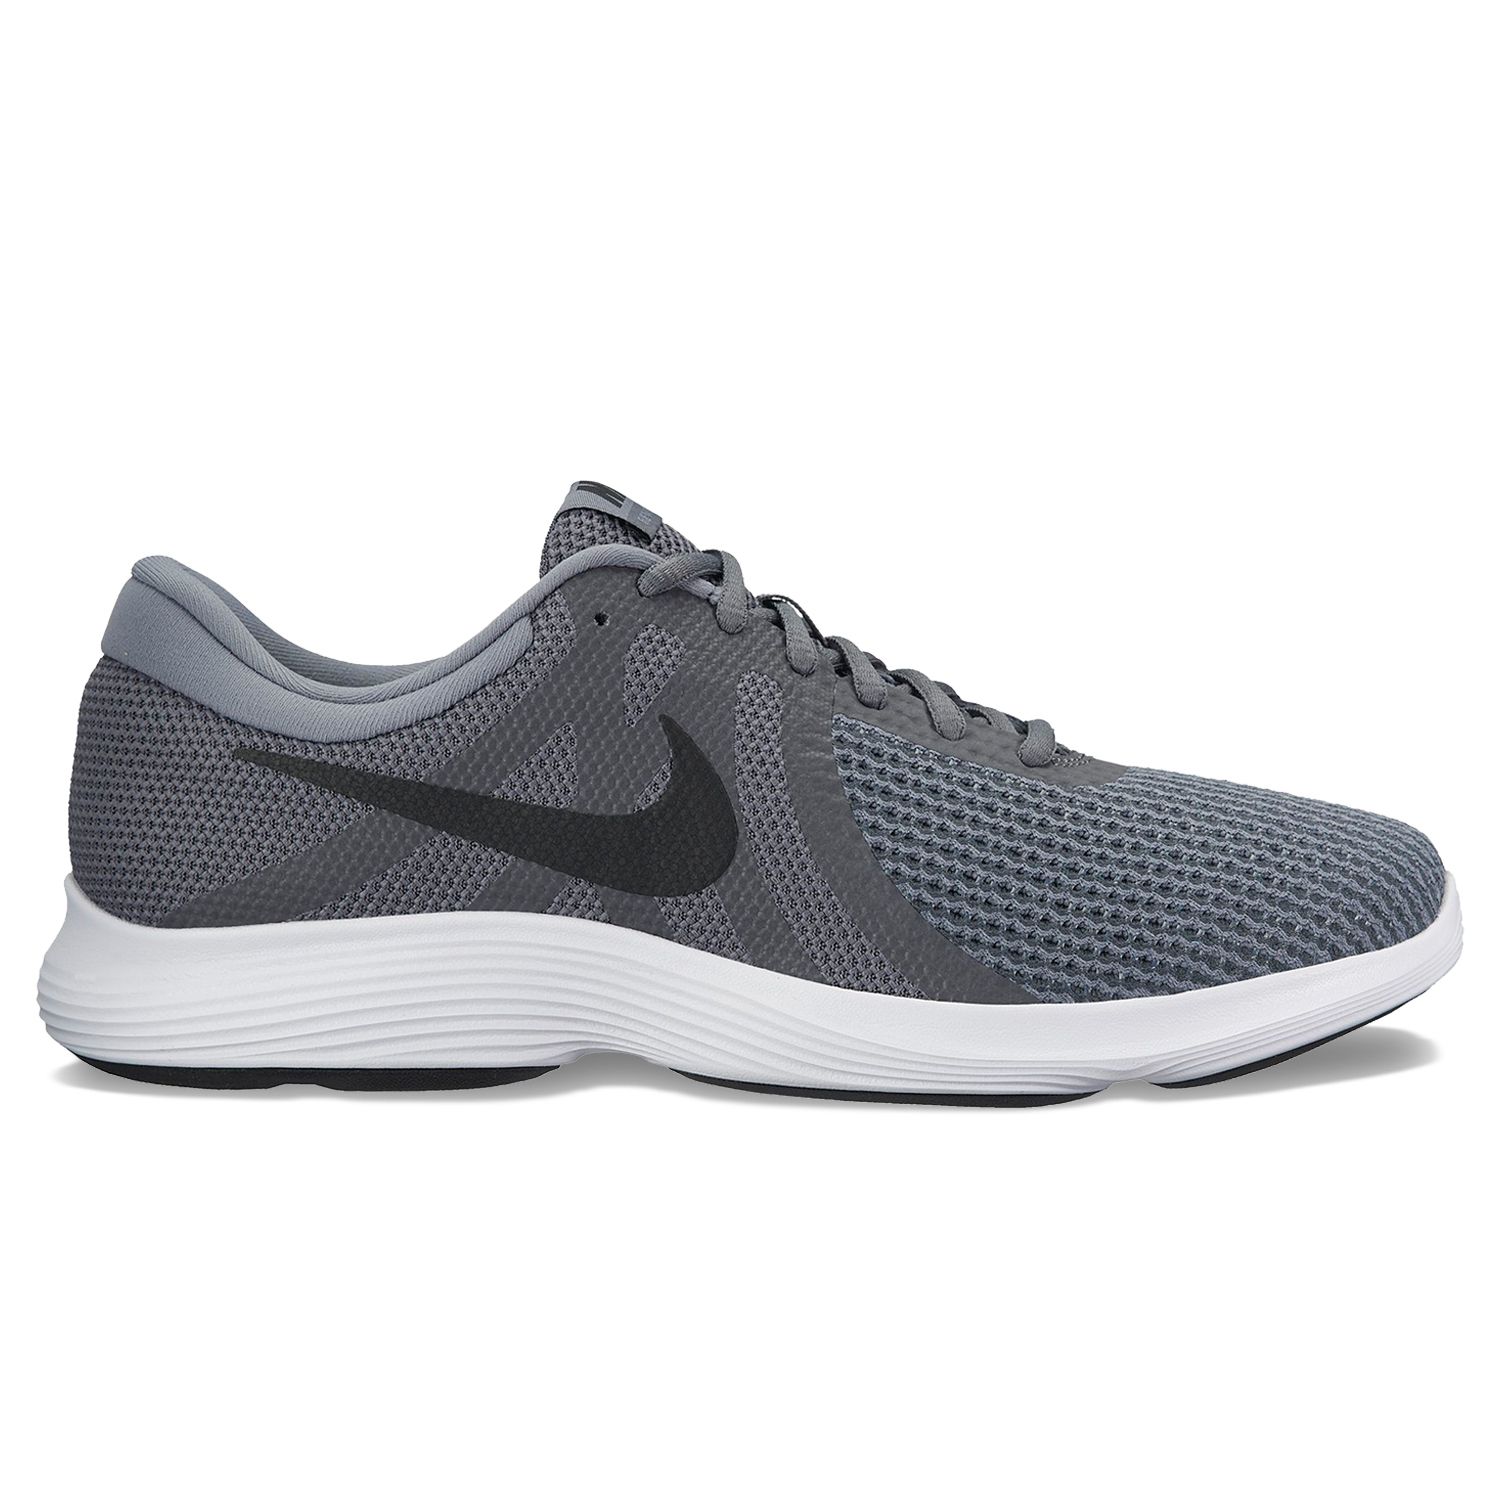 Clearance Men's Shoes | Kohl's